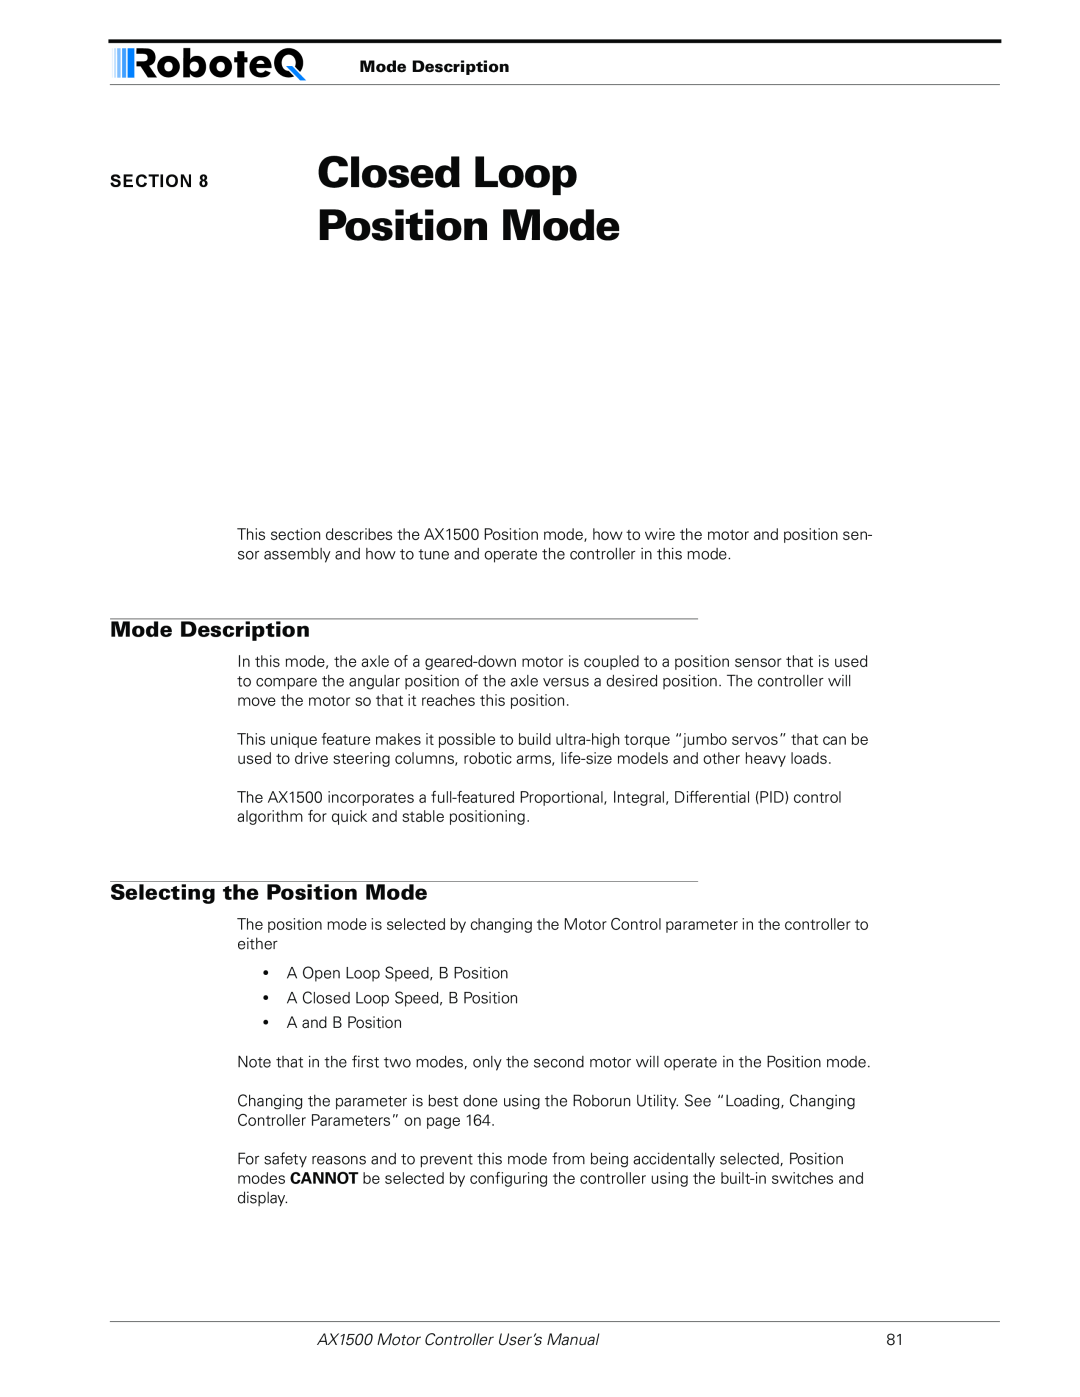 RoboteQ AX1500, AX2550 user manual Closed Loop Position Mode, Mode Description, Selecting the Position Mode 